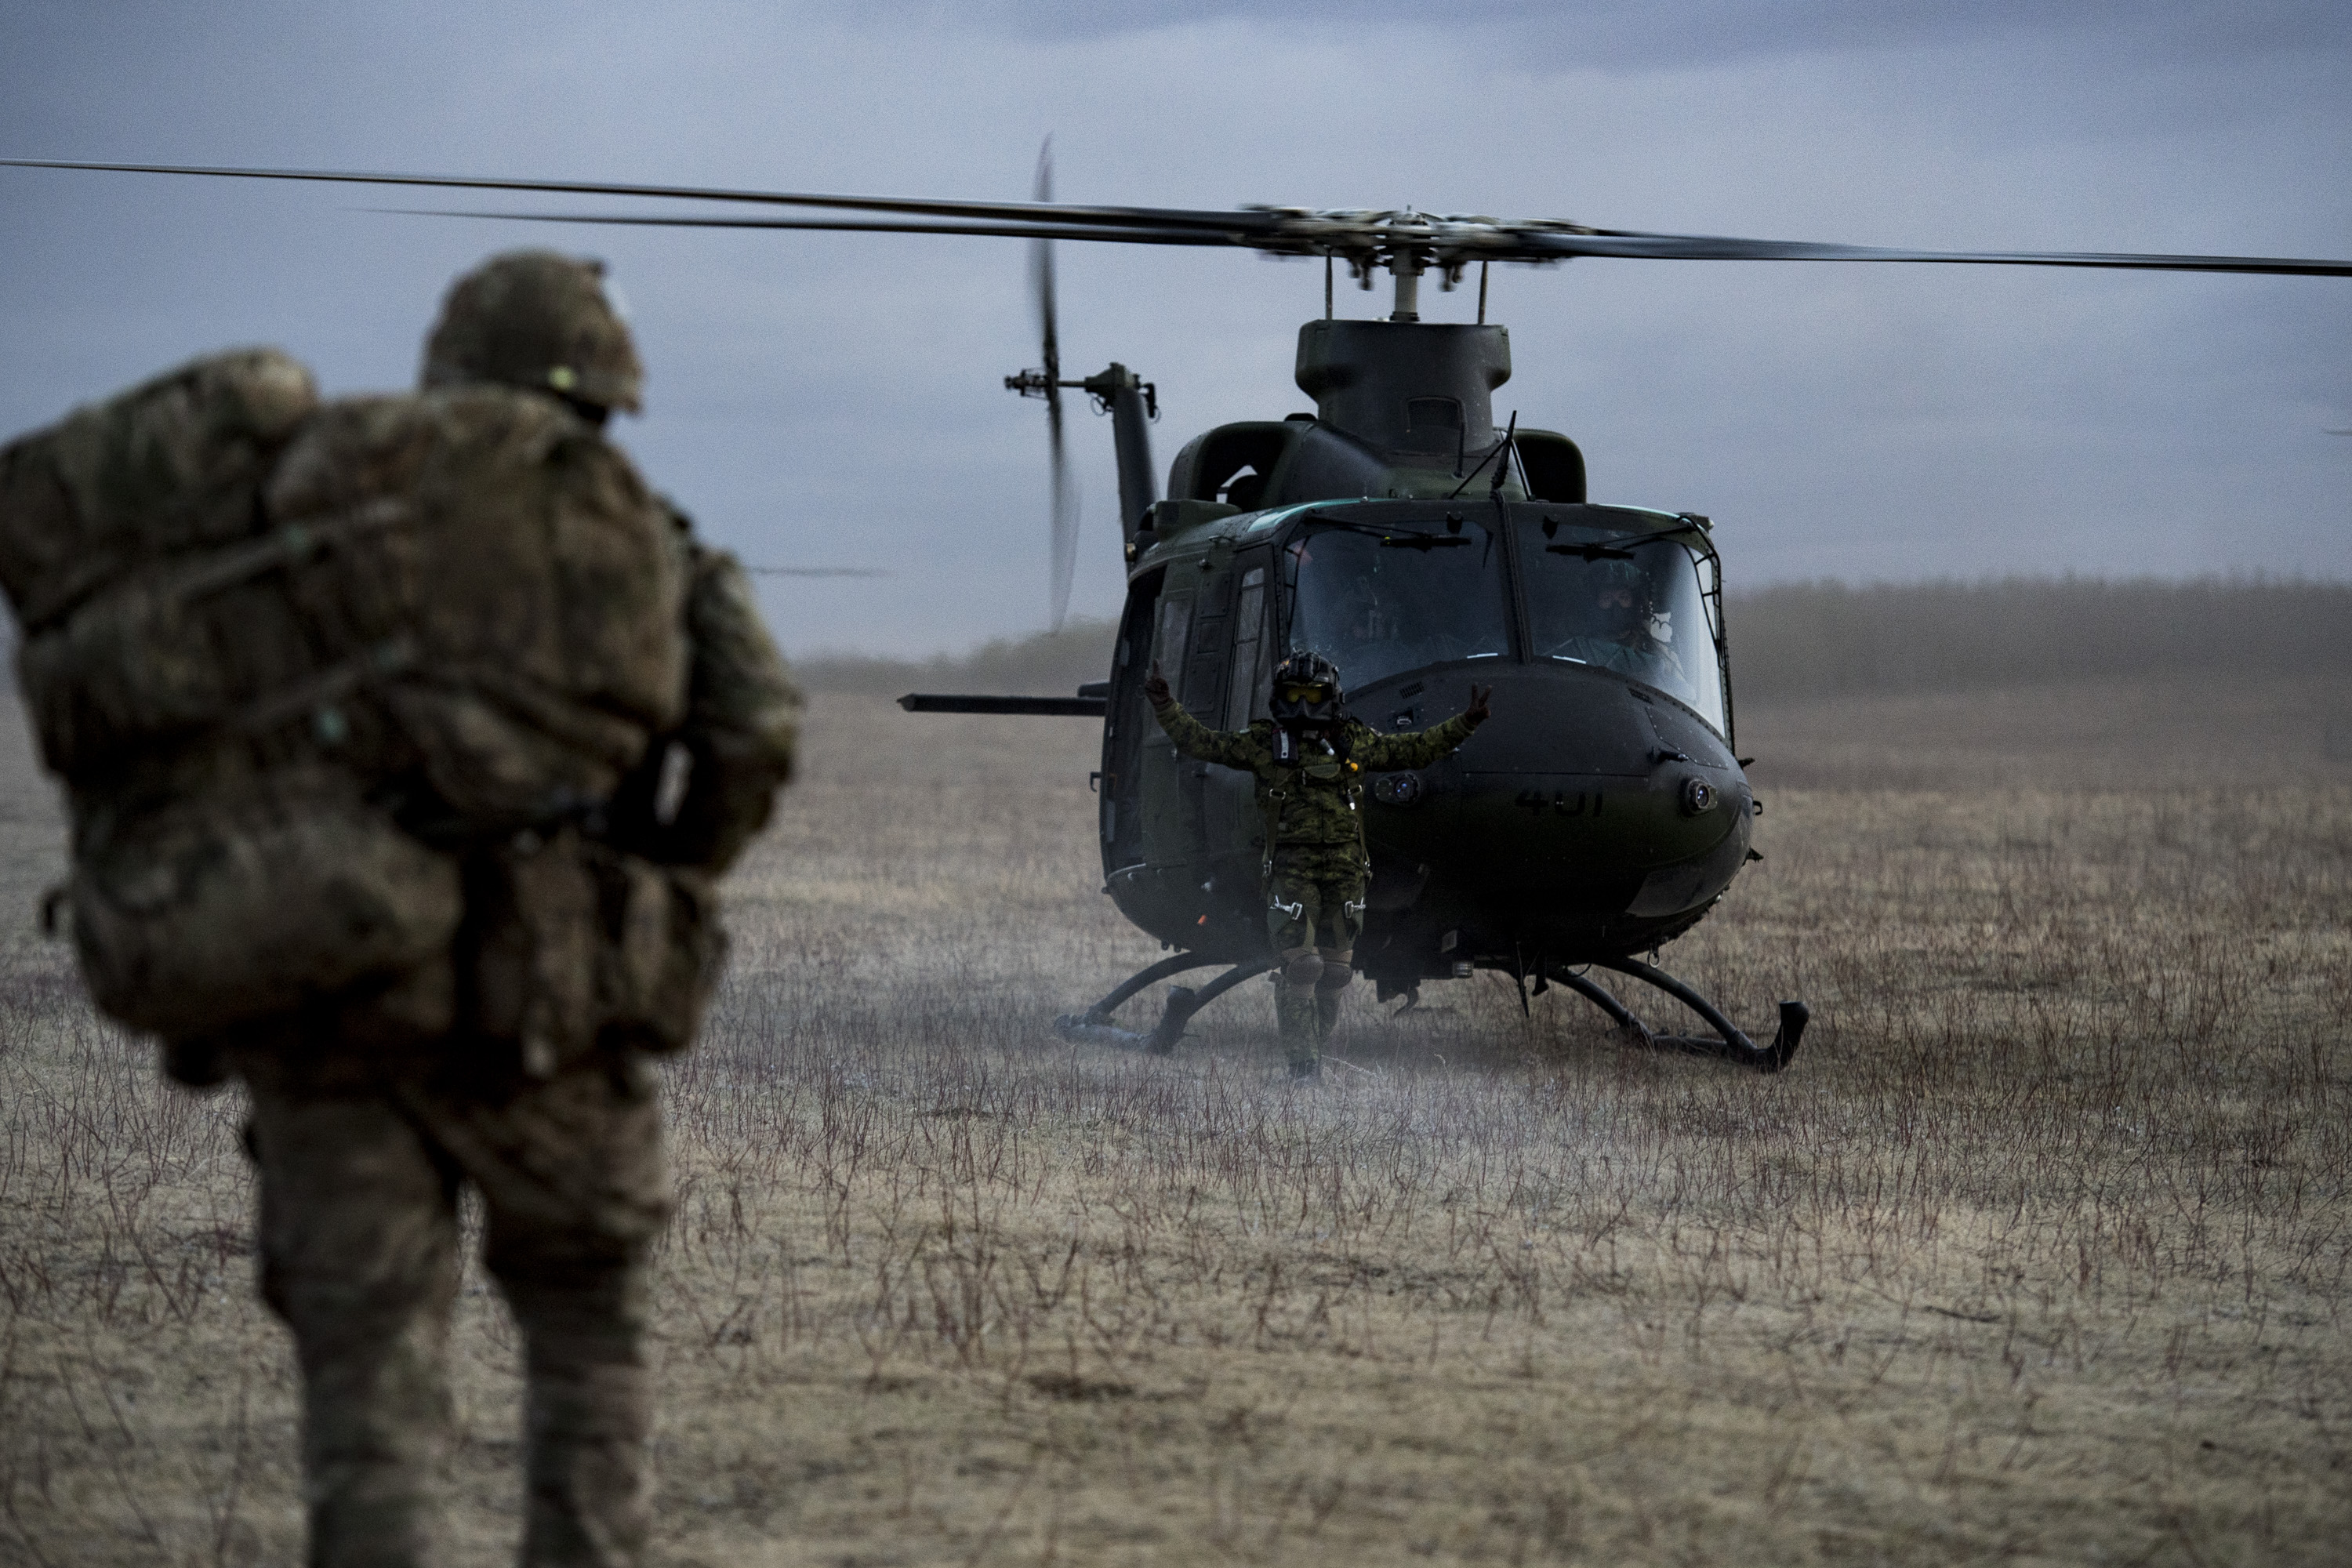  A Flight Engineer from a CH-146Â GriffonÂ Helicopter directs members of the British Army 1st Battalion, The Rifles during Exercise MAPLE RESOVE.